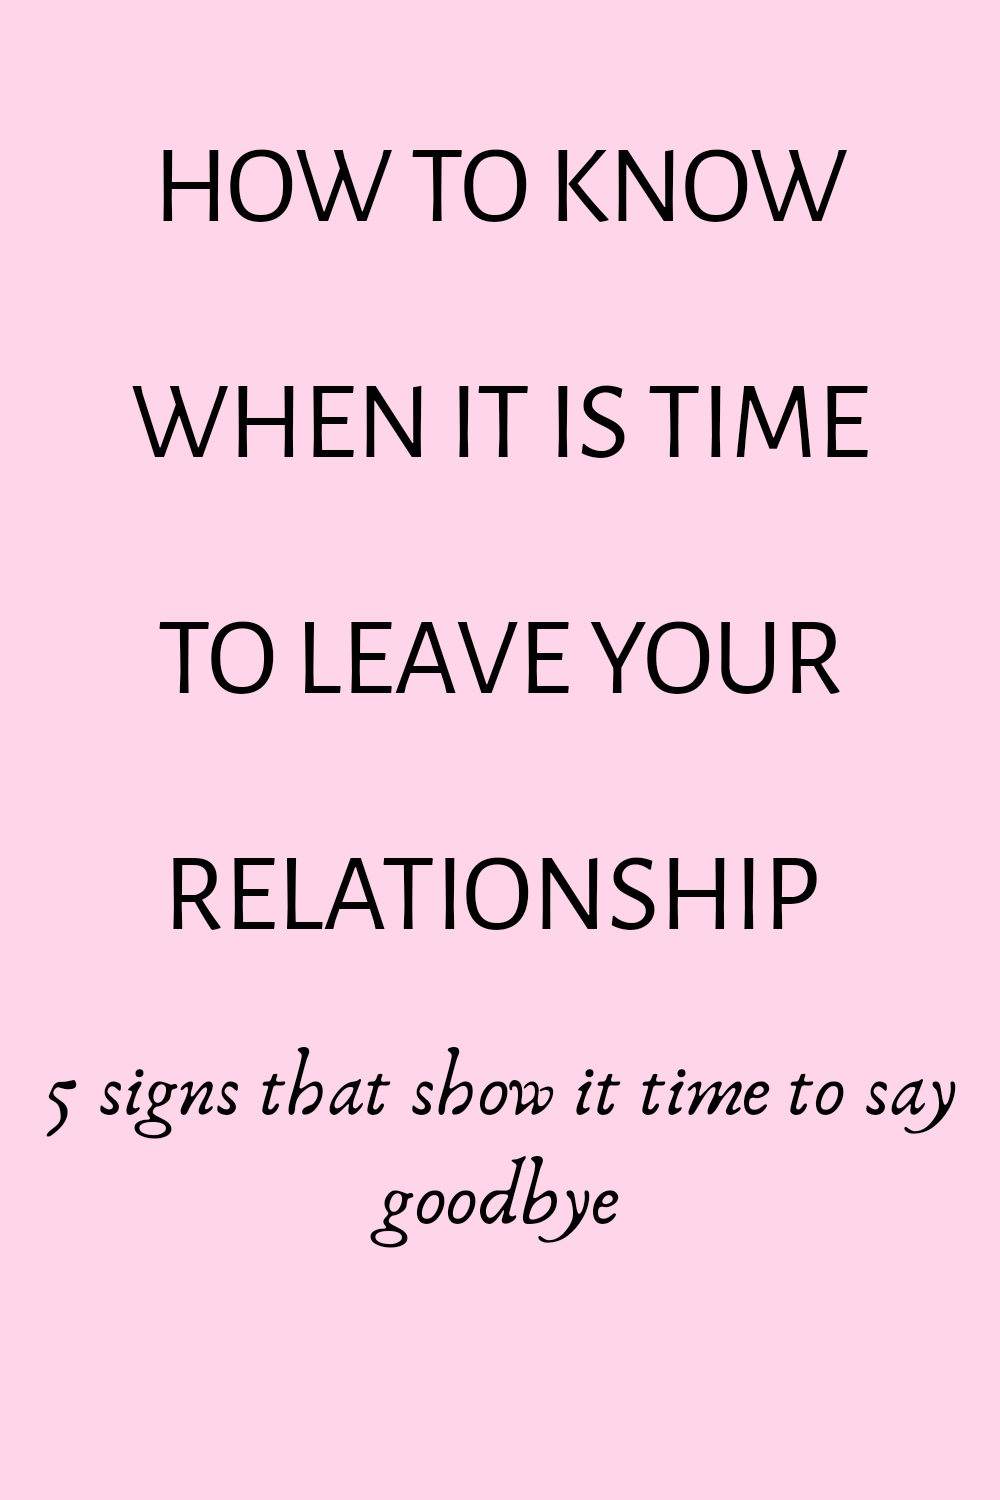 Signs that show it is time to end that relationship 